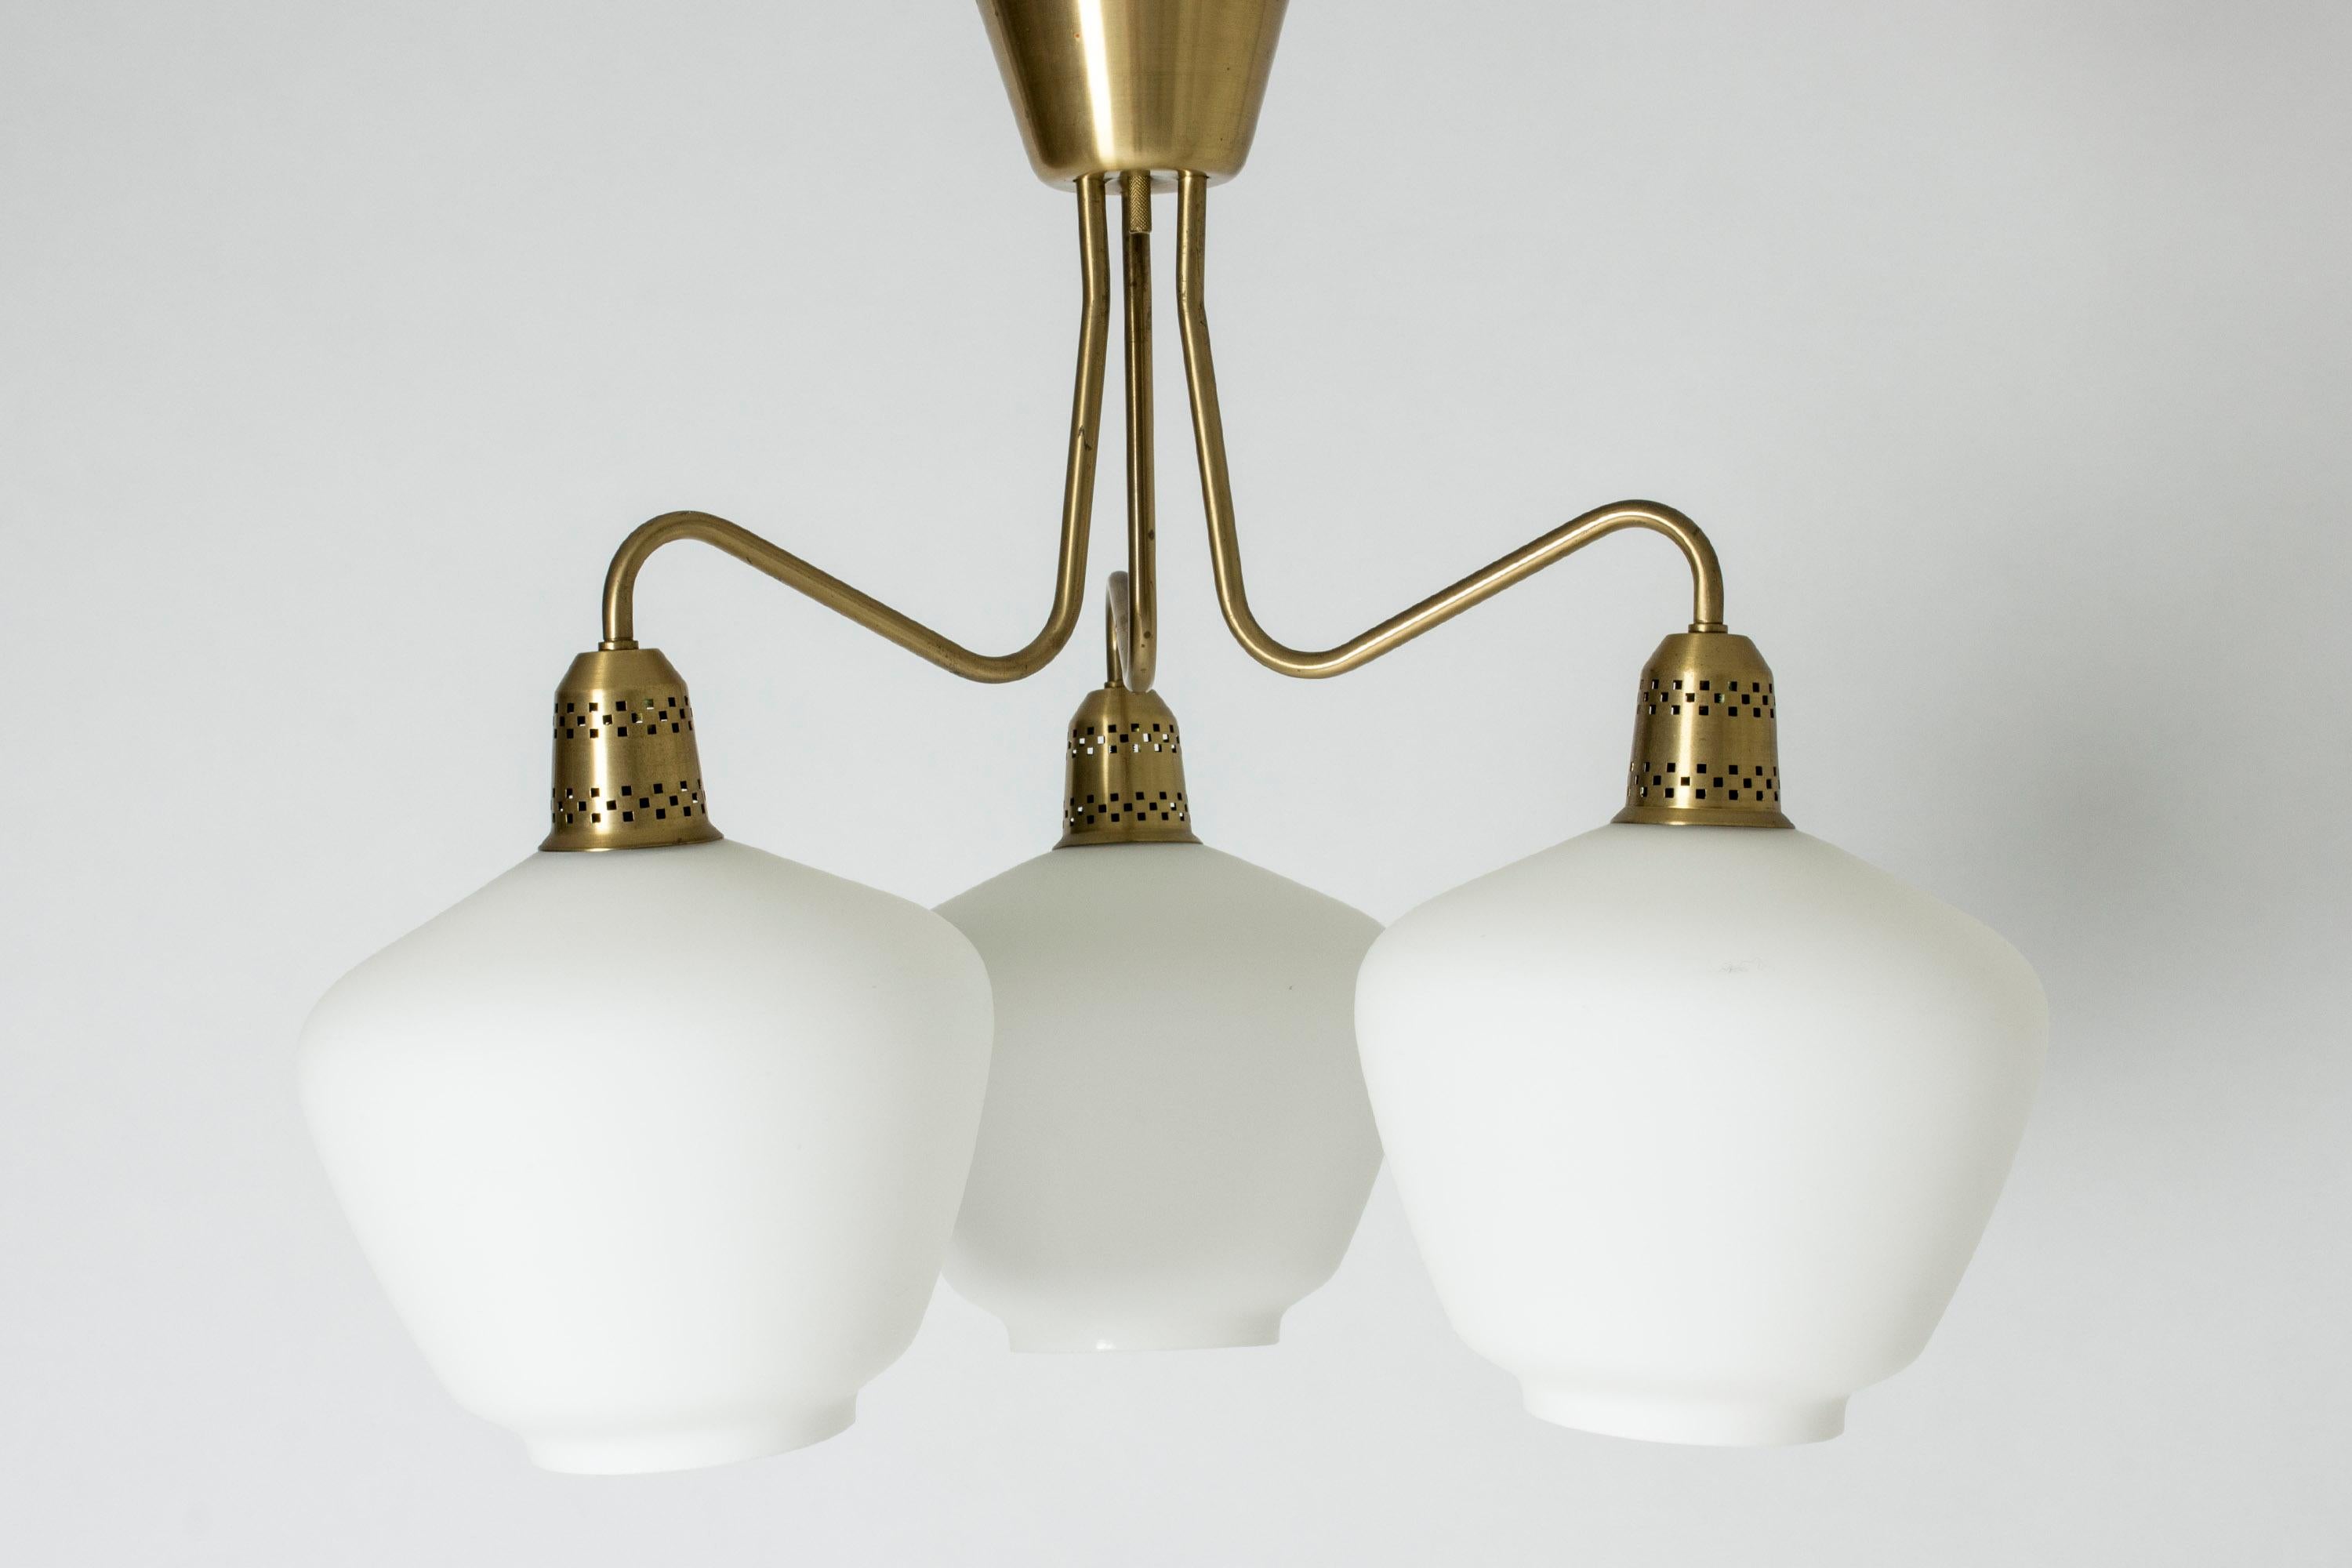 Elegant Swedish midcentury chandelier, with a brass frame and large, opaline glass shades. Beautifully cut out pattern in the brass light bulb holders.